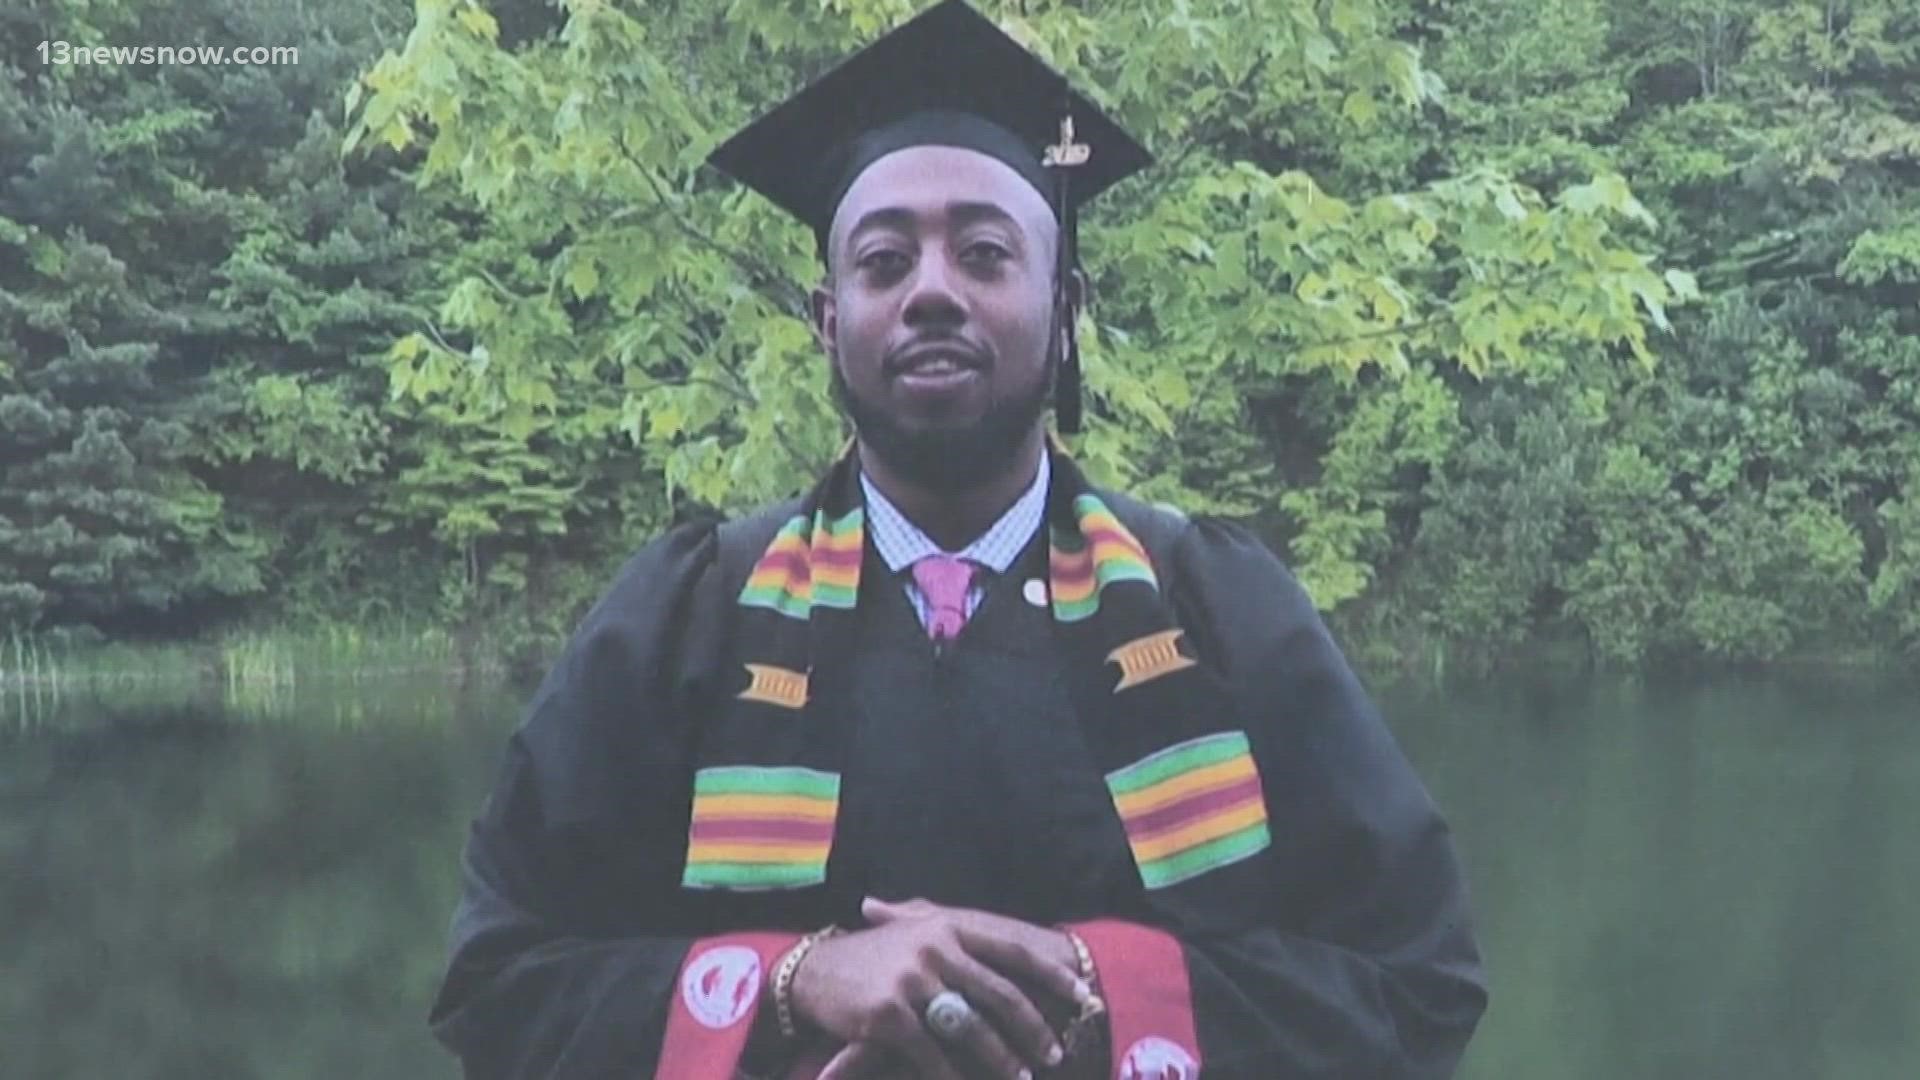 The amended lawsuit alleges Donovon Lynch was alive for 14 minutes between the time he was shot by a Virginia Beach Police officer & the time he was pronounced dead.